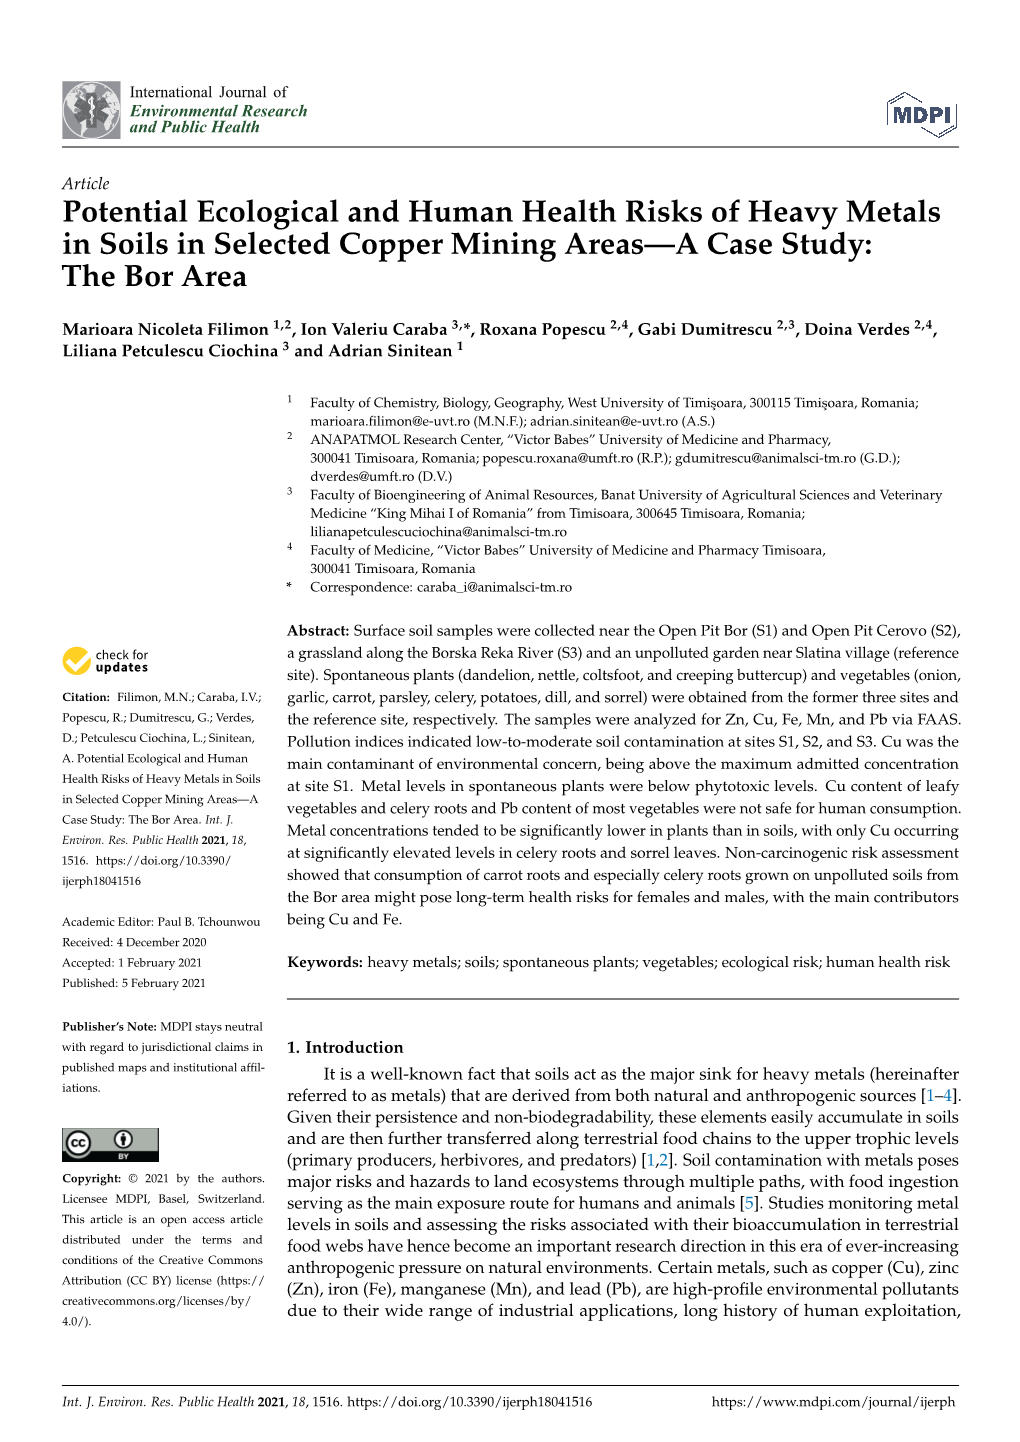 Potential Ecological and Human Health Risks of Heavy Metals in Soils in Selected Copper Mining Areas—A Case Study: the Bor Area